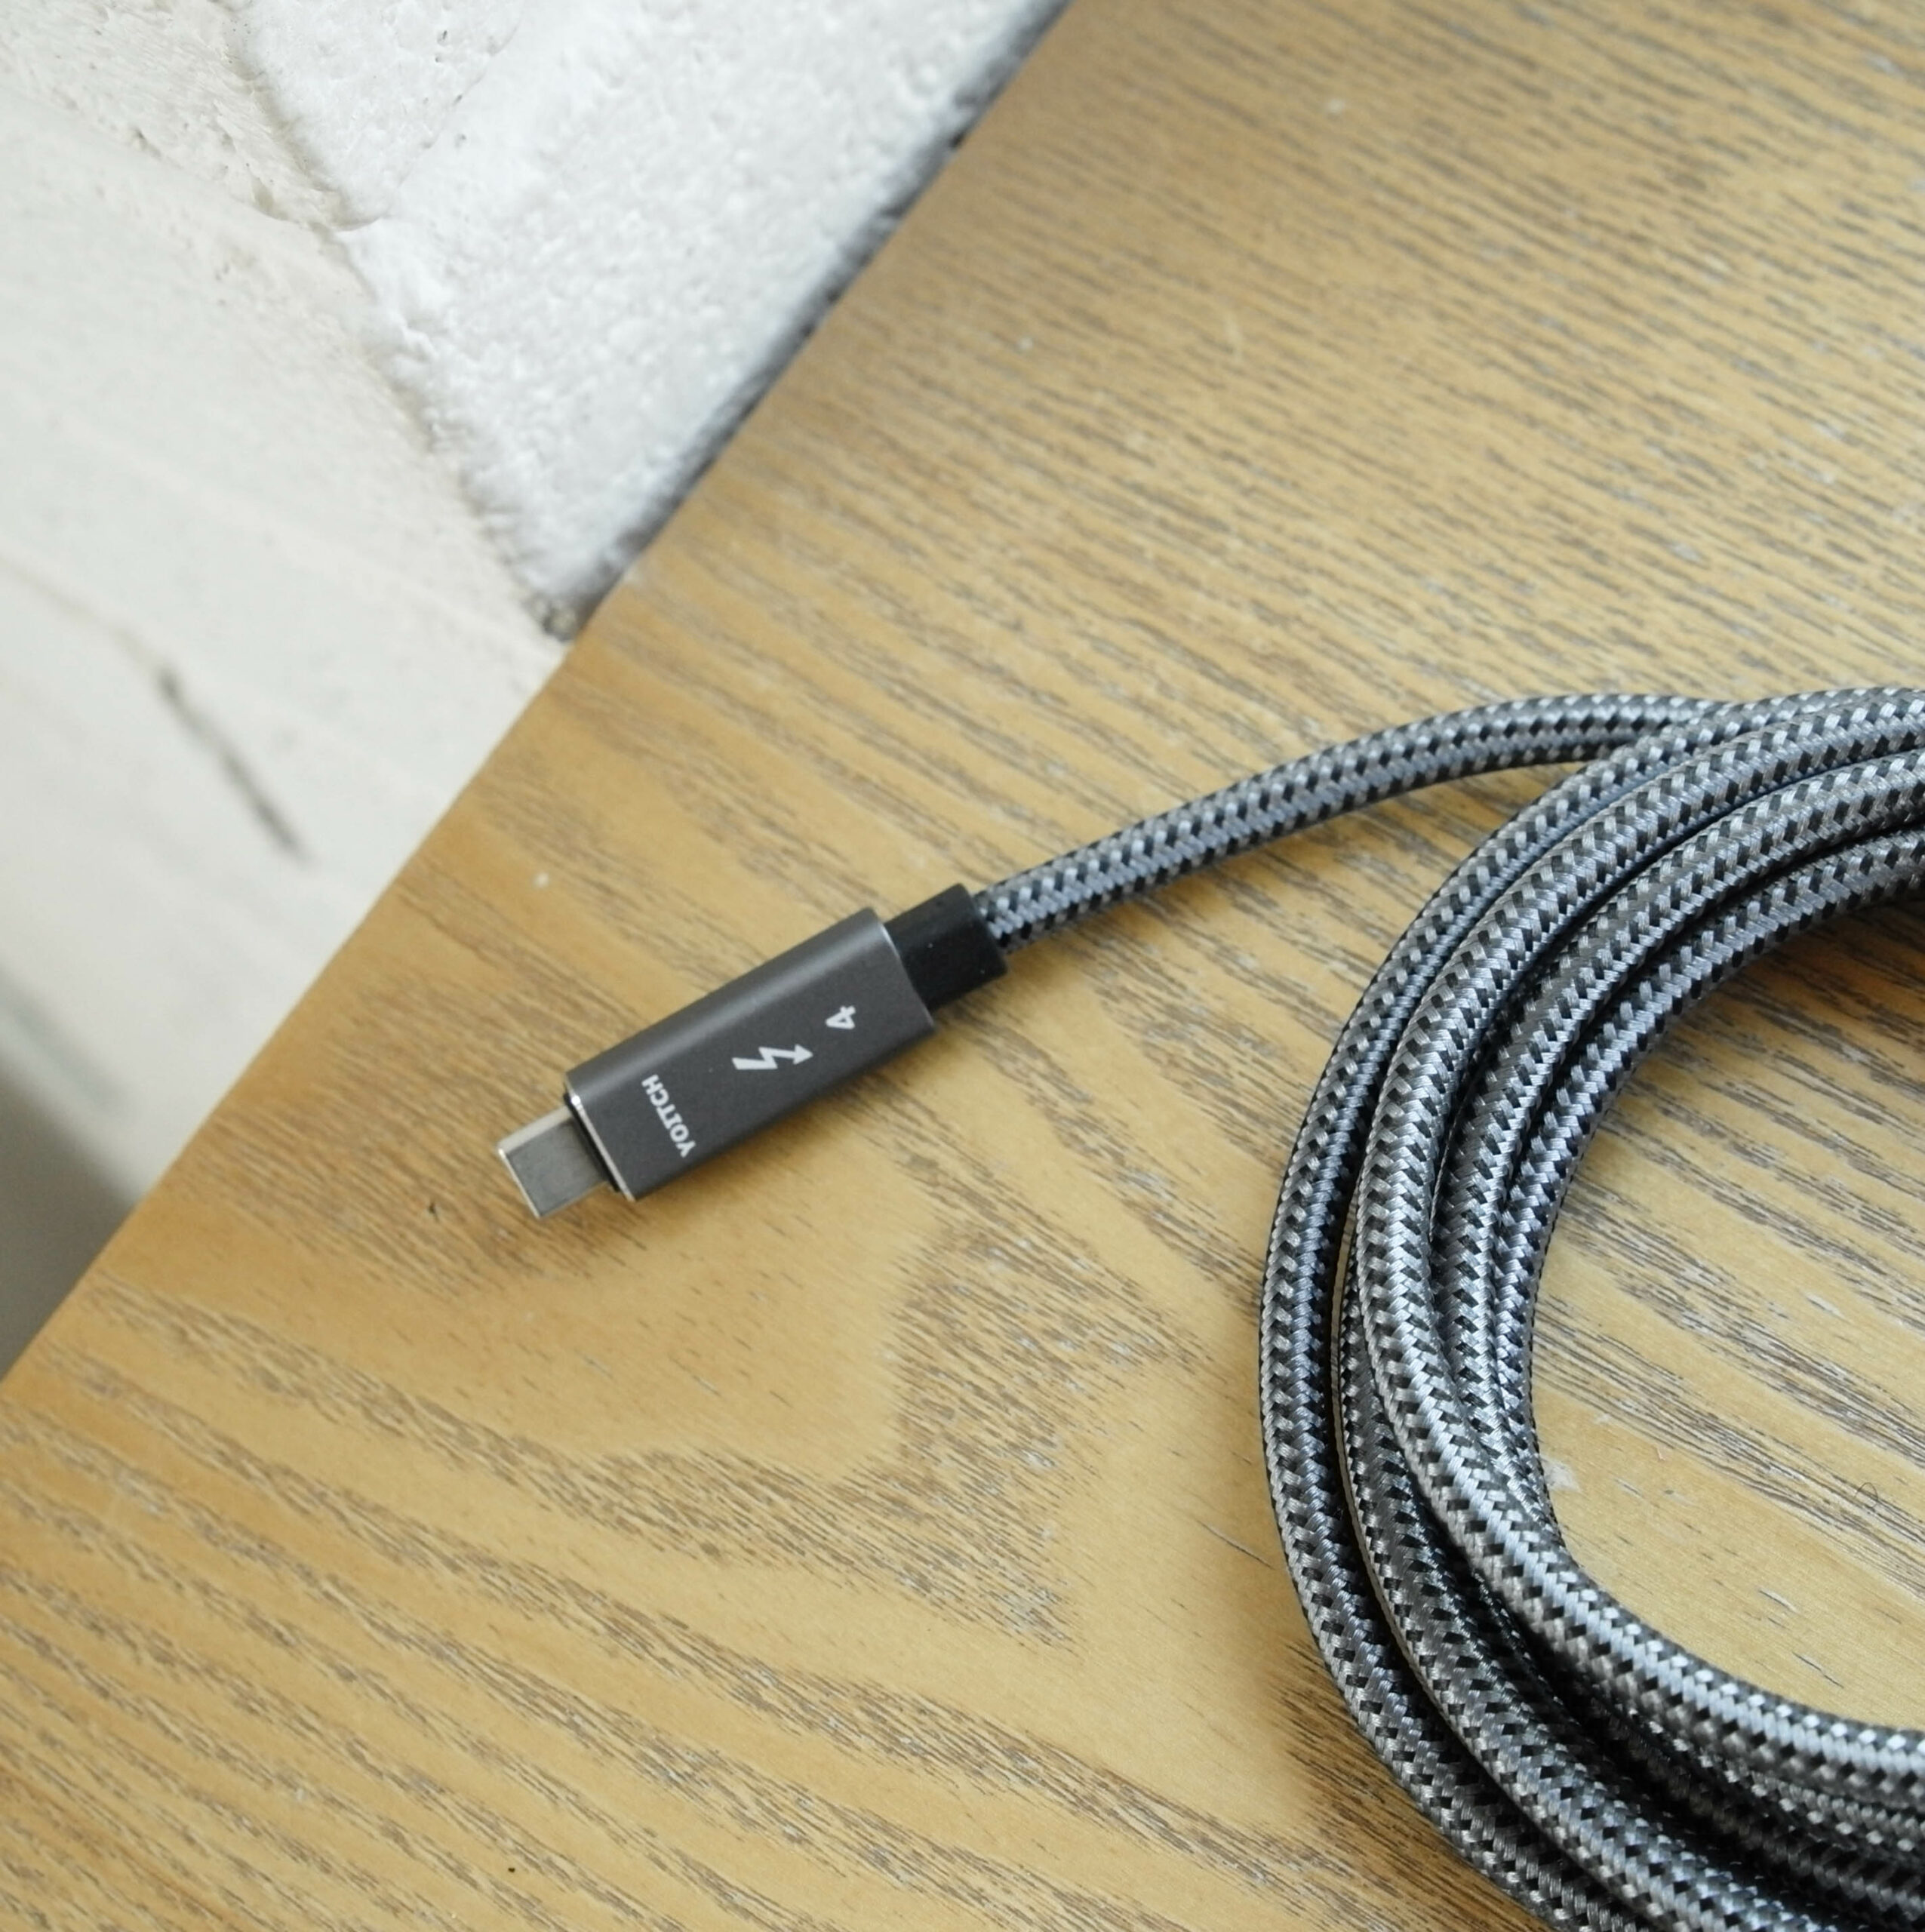 Thunderbolt 4 cable